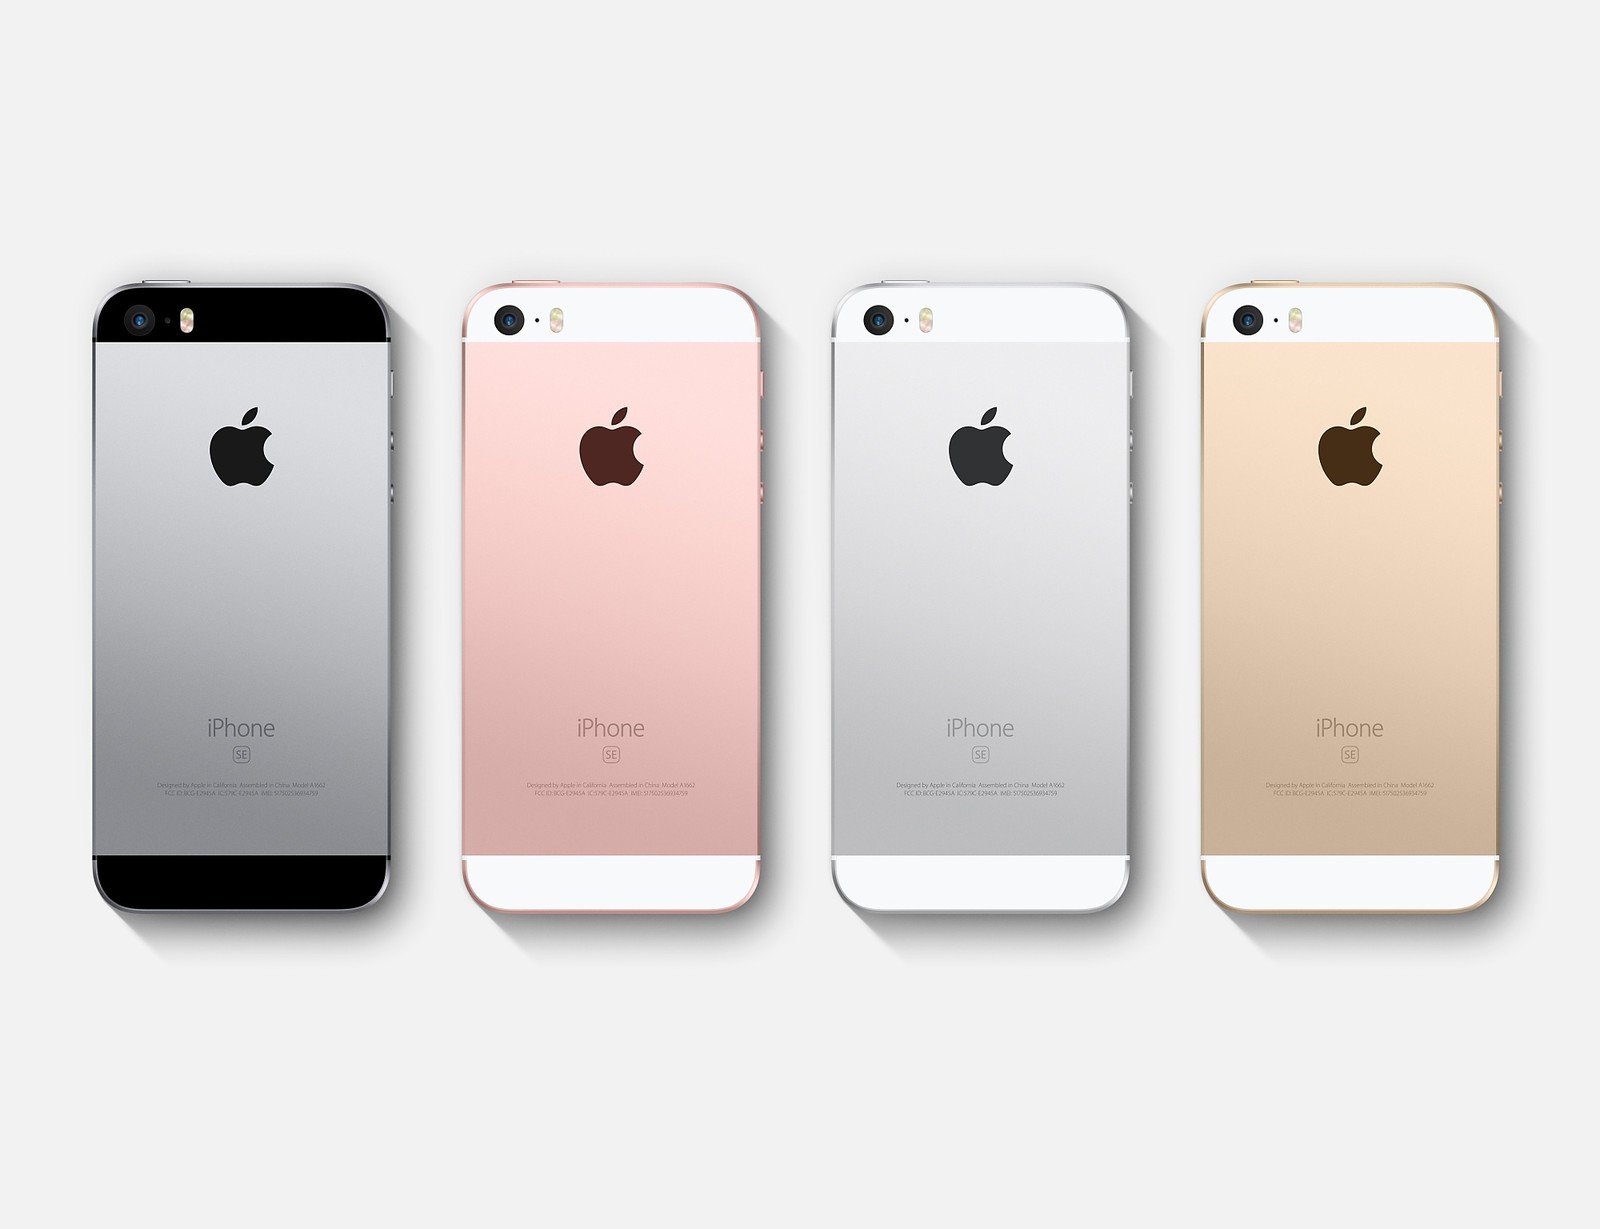 iPhone SE Price in Nepal will be approx 55K - 60K available in 4 color options: Silver, gold, space gray, and rose gold. 